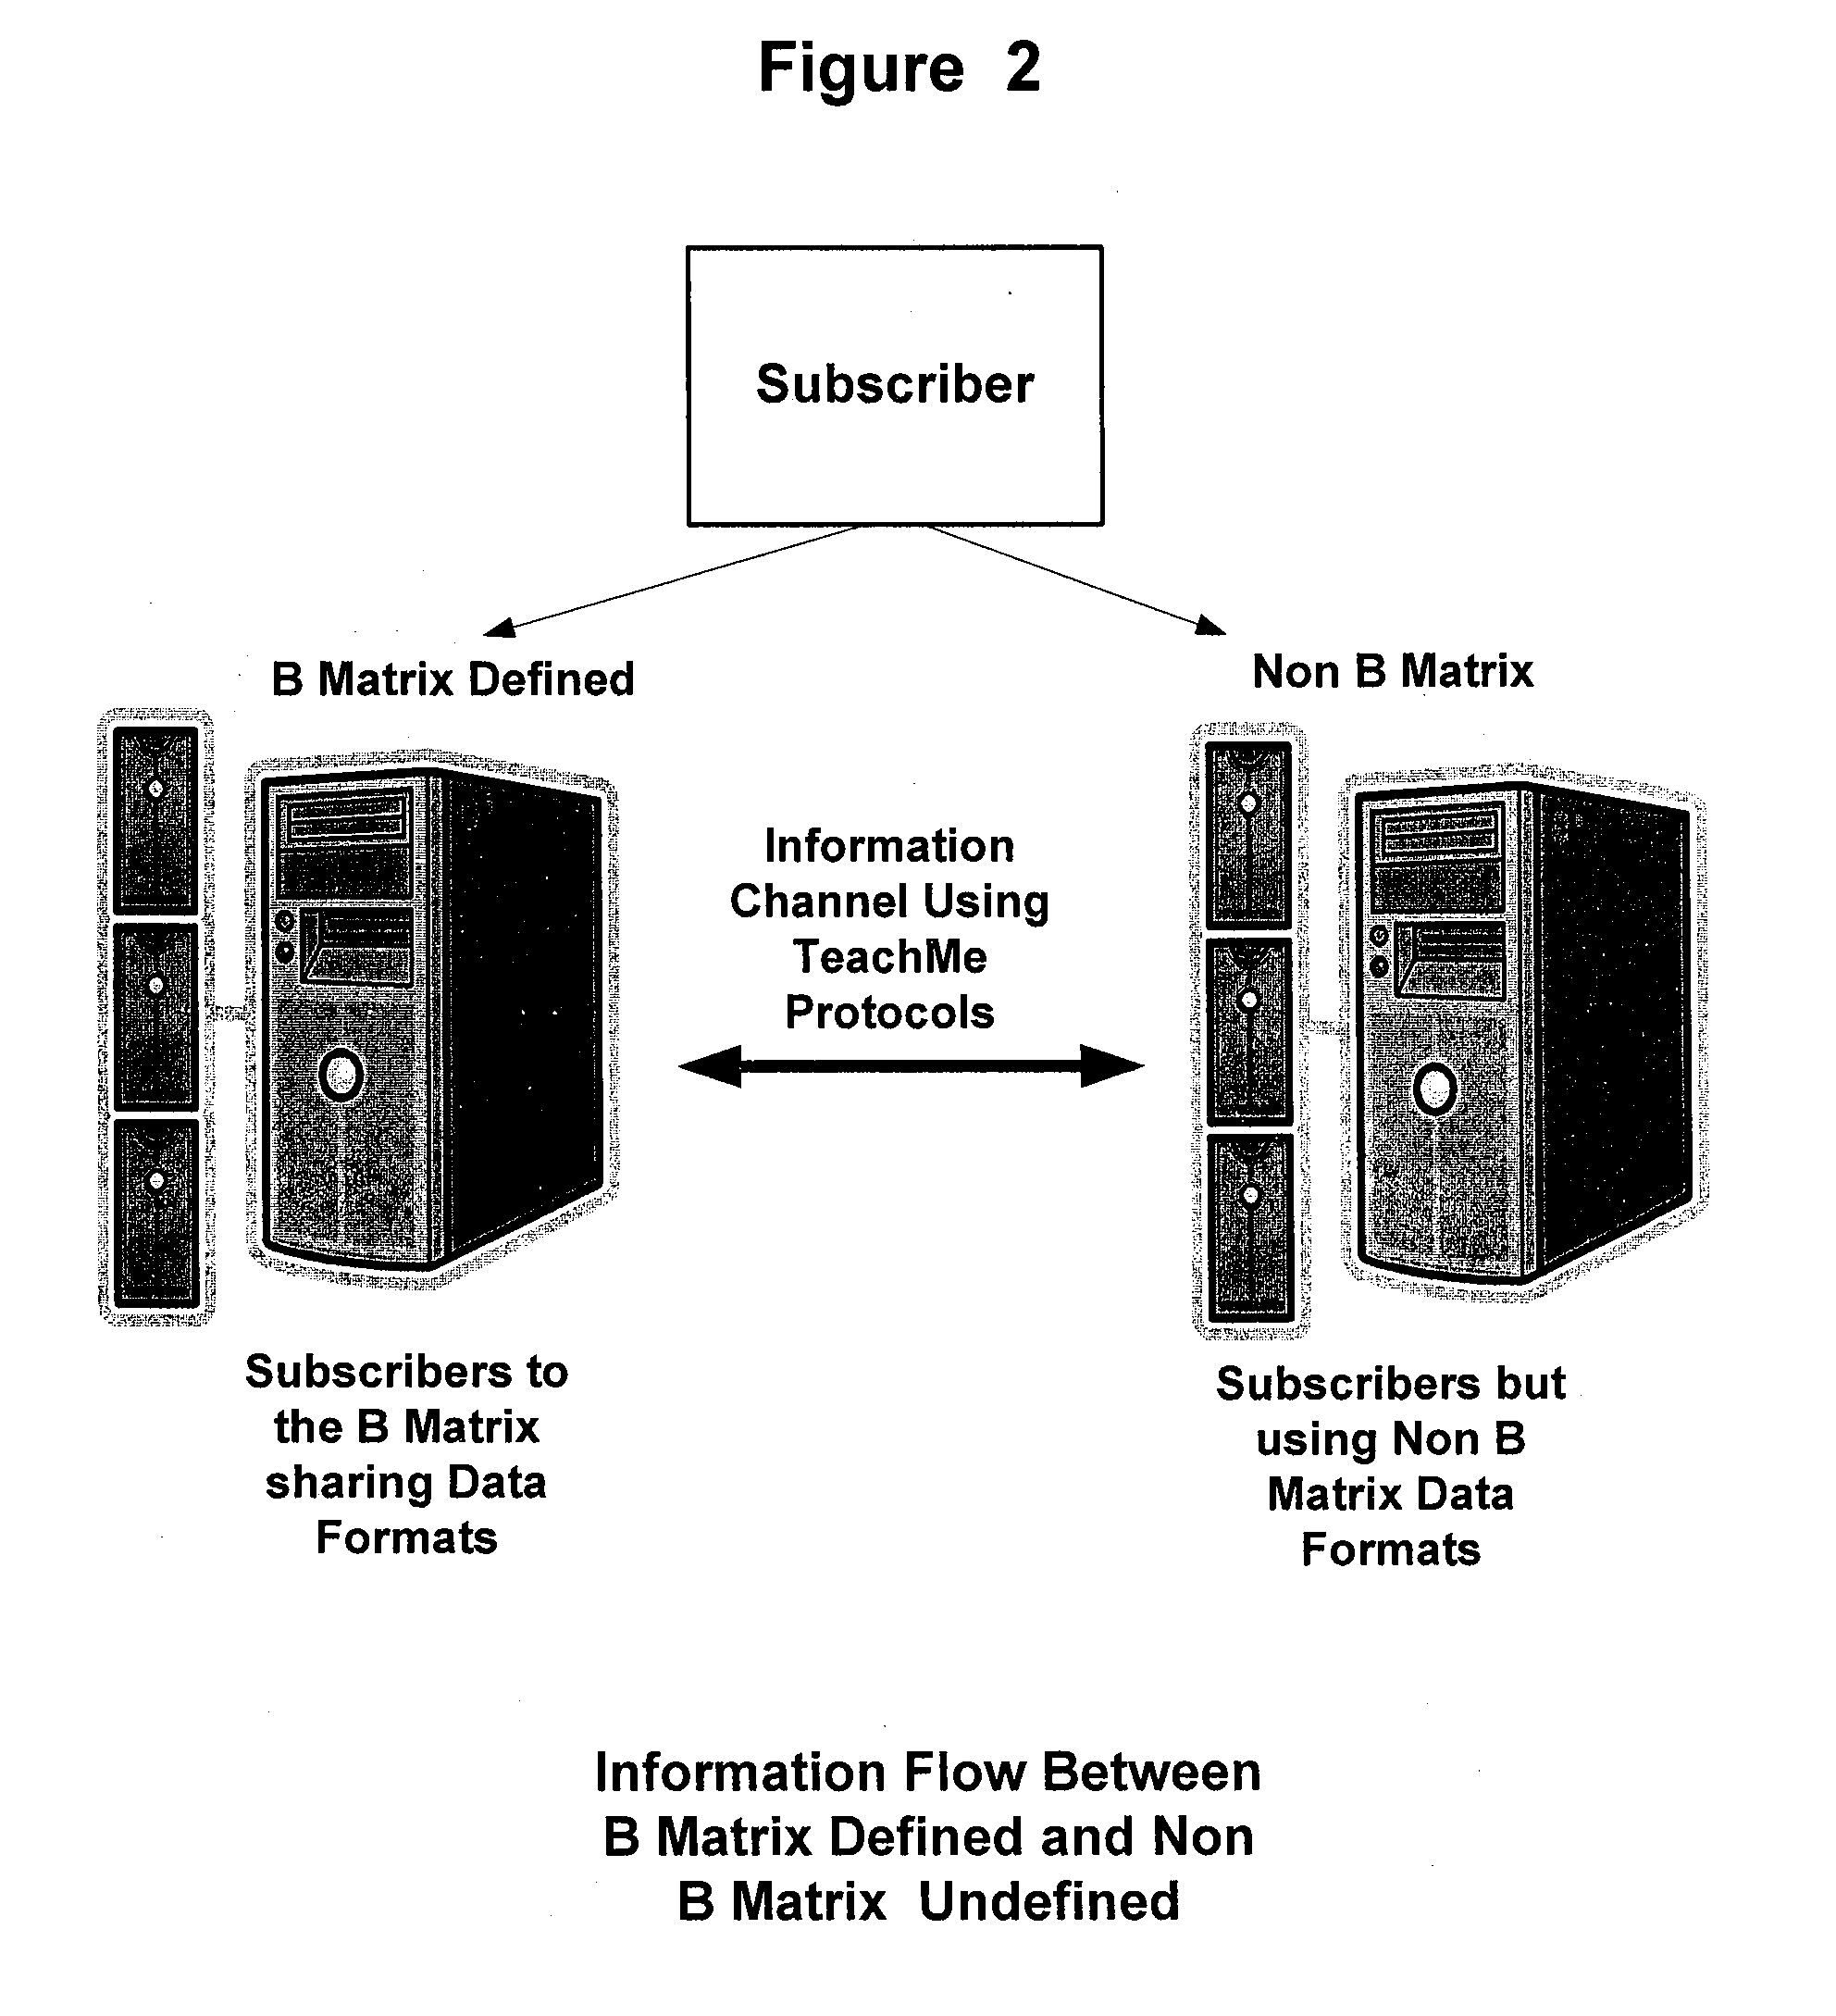 Response scoring system for verbal behavior within a behavioral stream with a remote central processing system and associated handheld communicating devices